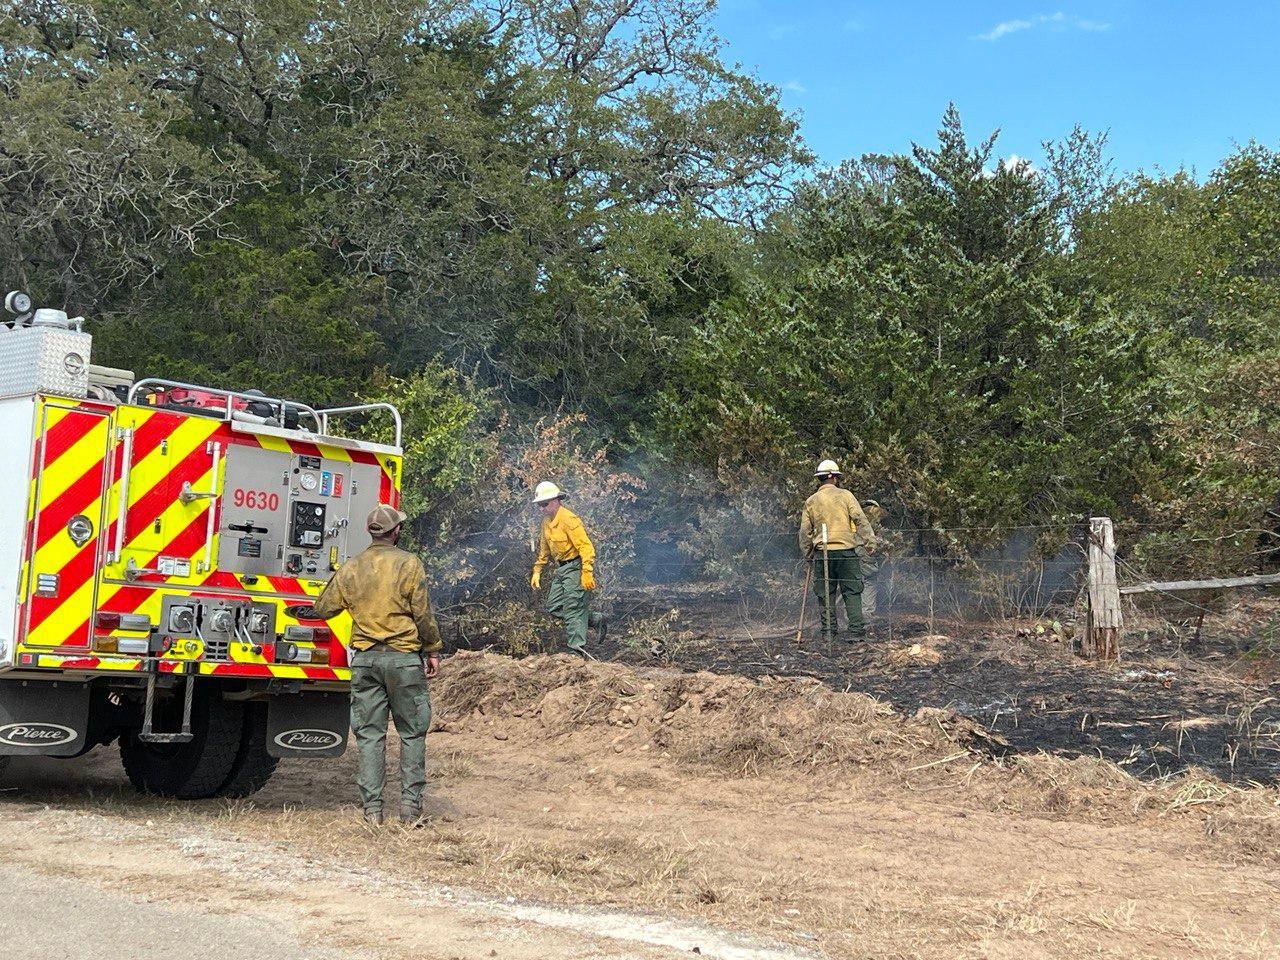 3 male firefighters with yellow shirts and green pants work around a fire engine with red and yellow stripes on the back.  Firefighter pulls fire hose through wire fence to put water on fire creeping underneath a tree.